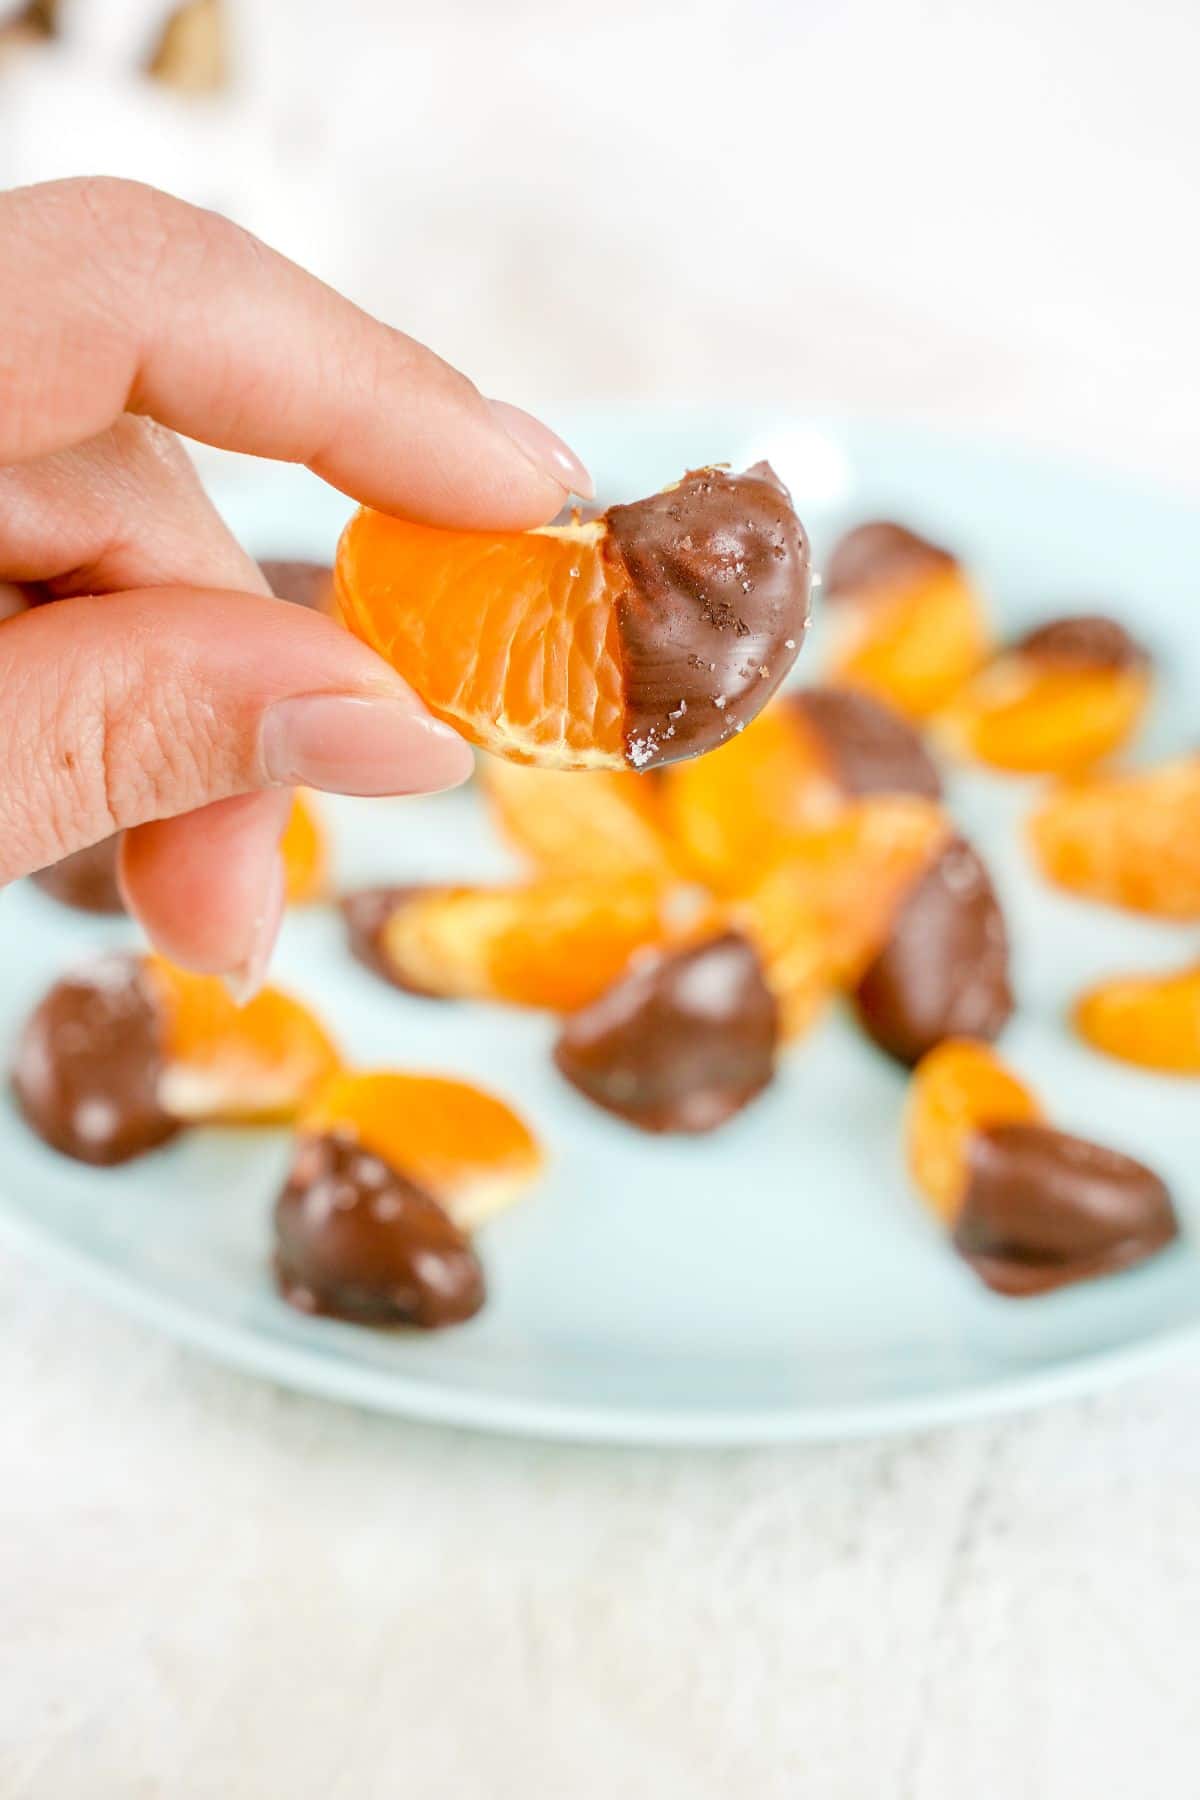 A piece of Chocolate Covered Oranges in fingers